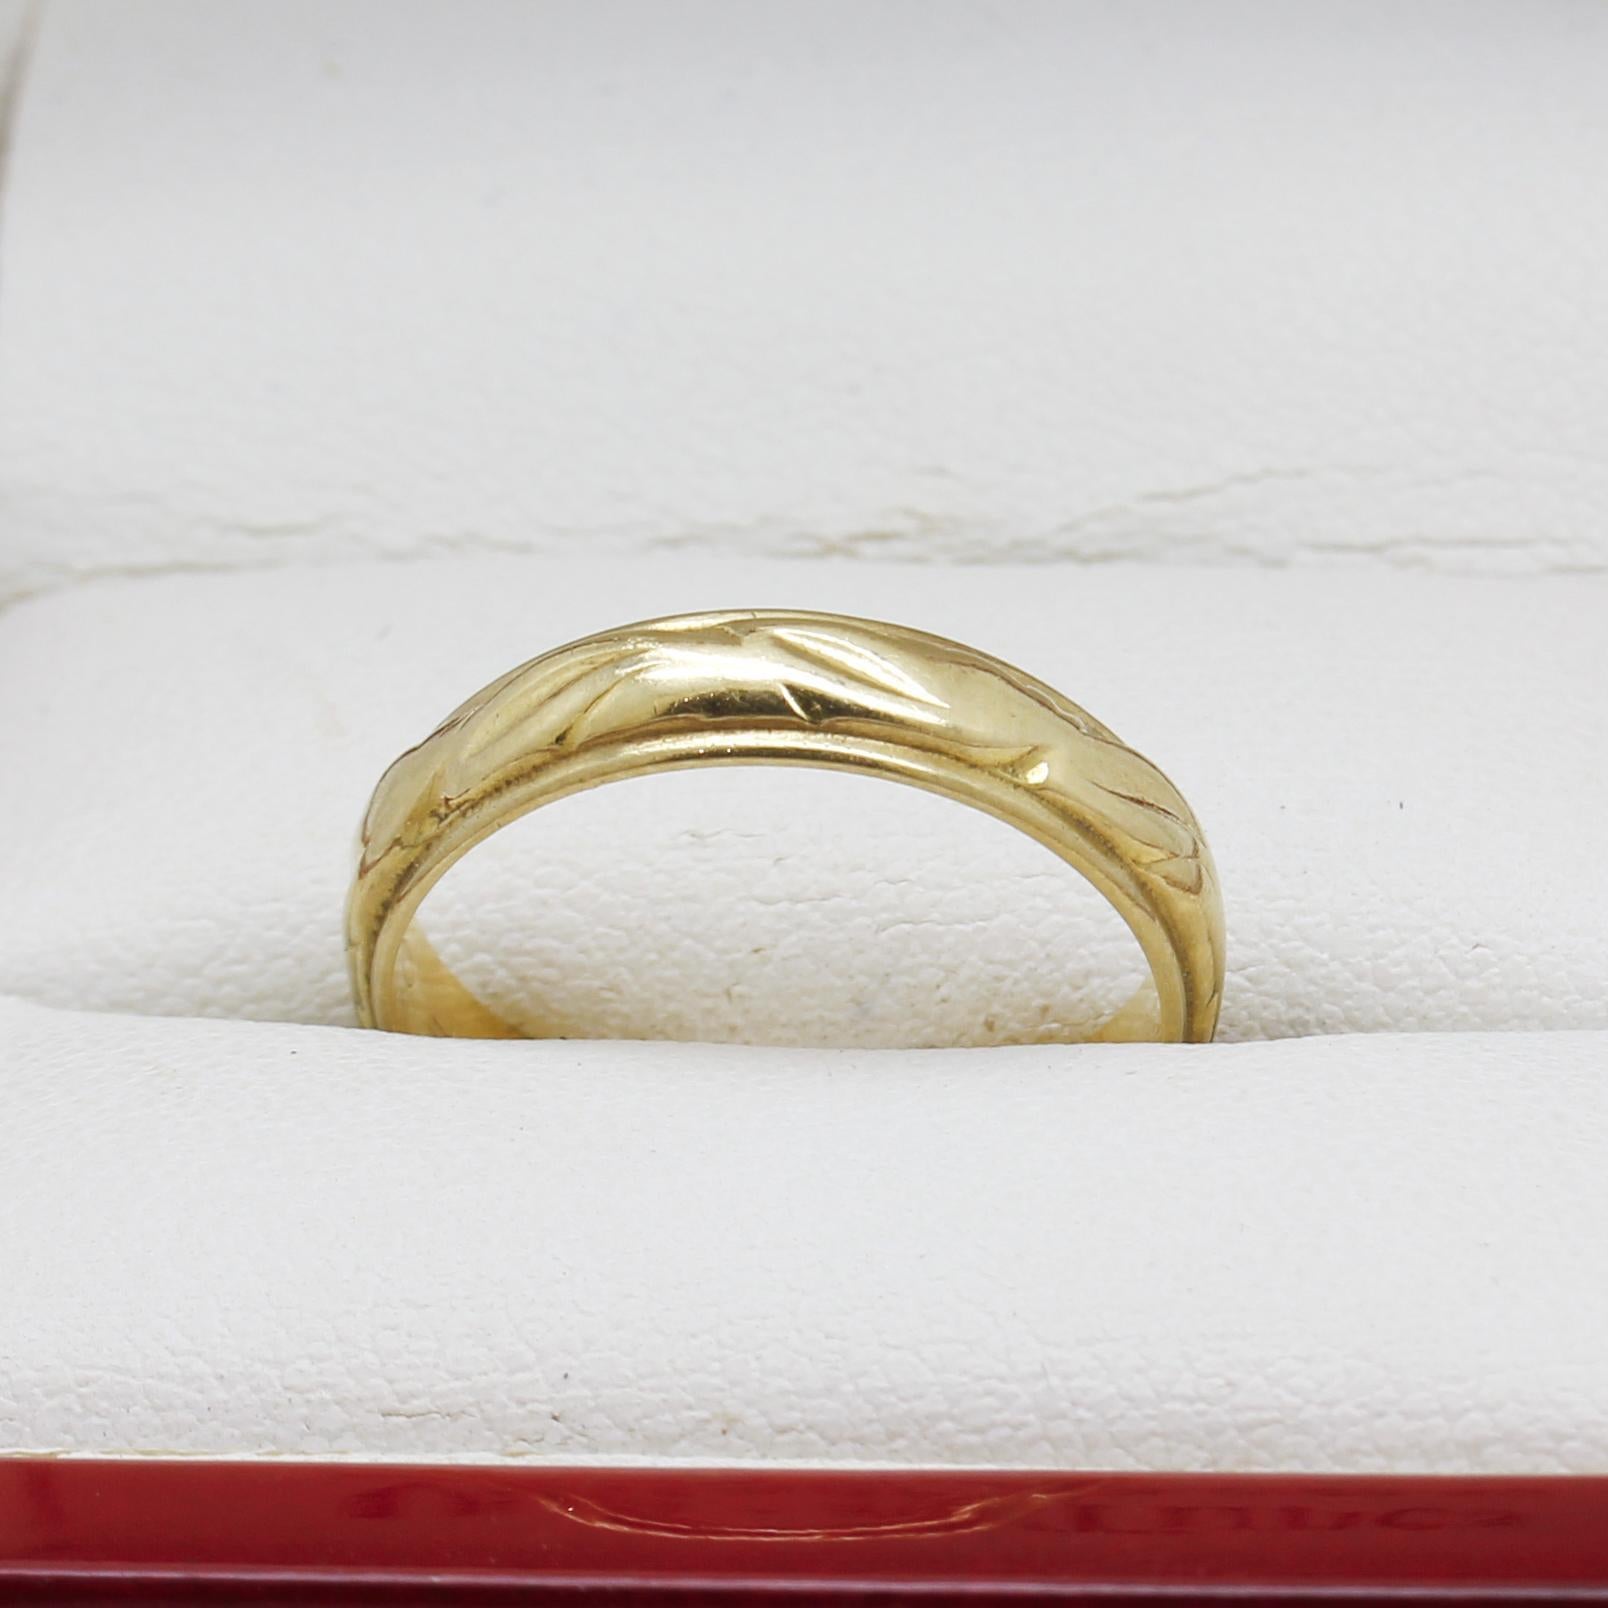 Vintage Women's Engraved Gold Wedding Band In Good Condition For Sale In BALMAIN, NSW